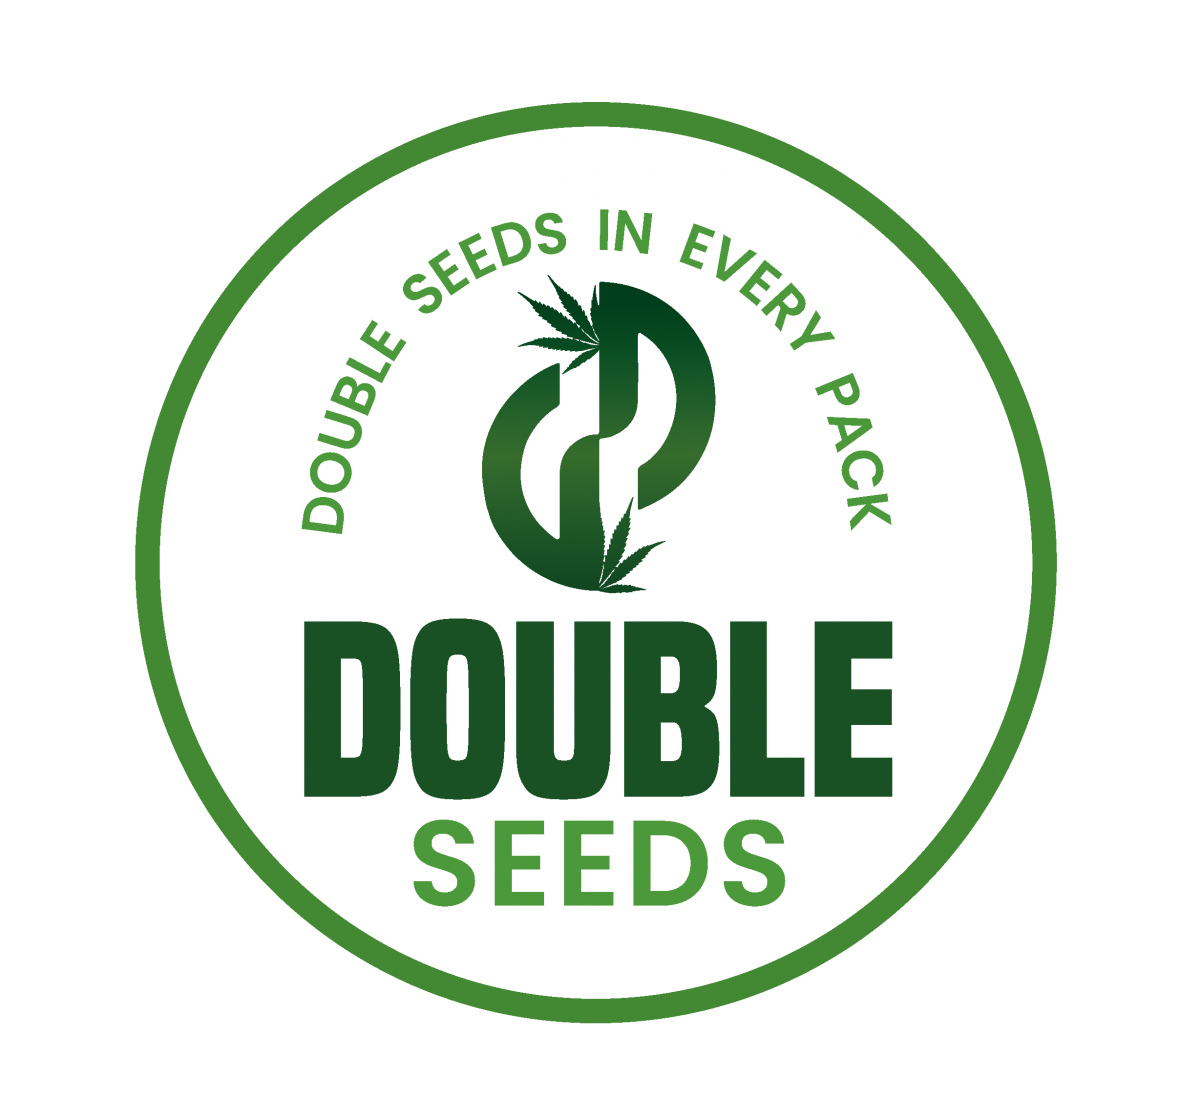 Blue Cheese Feminised Cannabis Seeds - Double Seeds